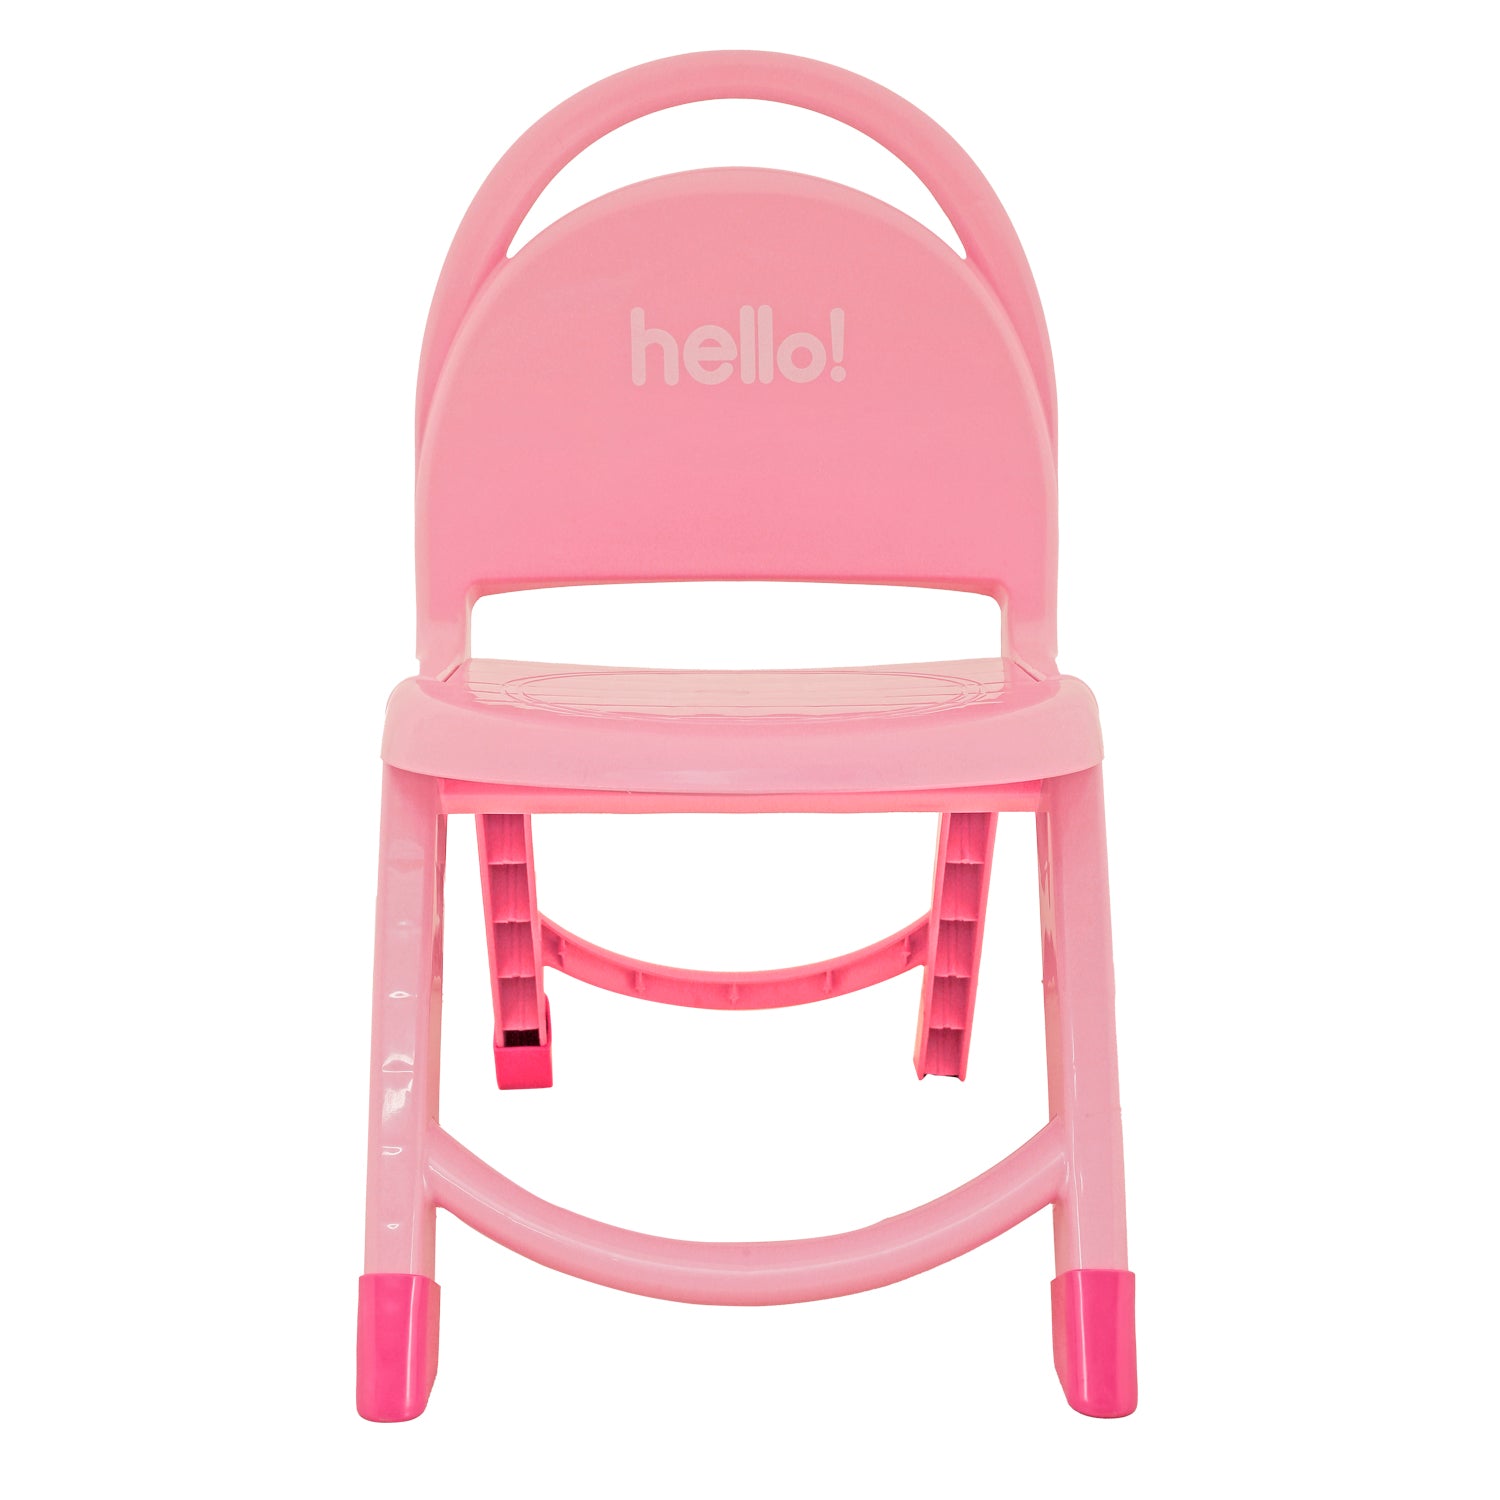 Foldable Multipurpose Pink Chair - Baby Moo